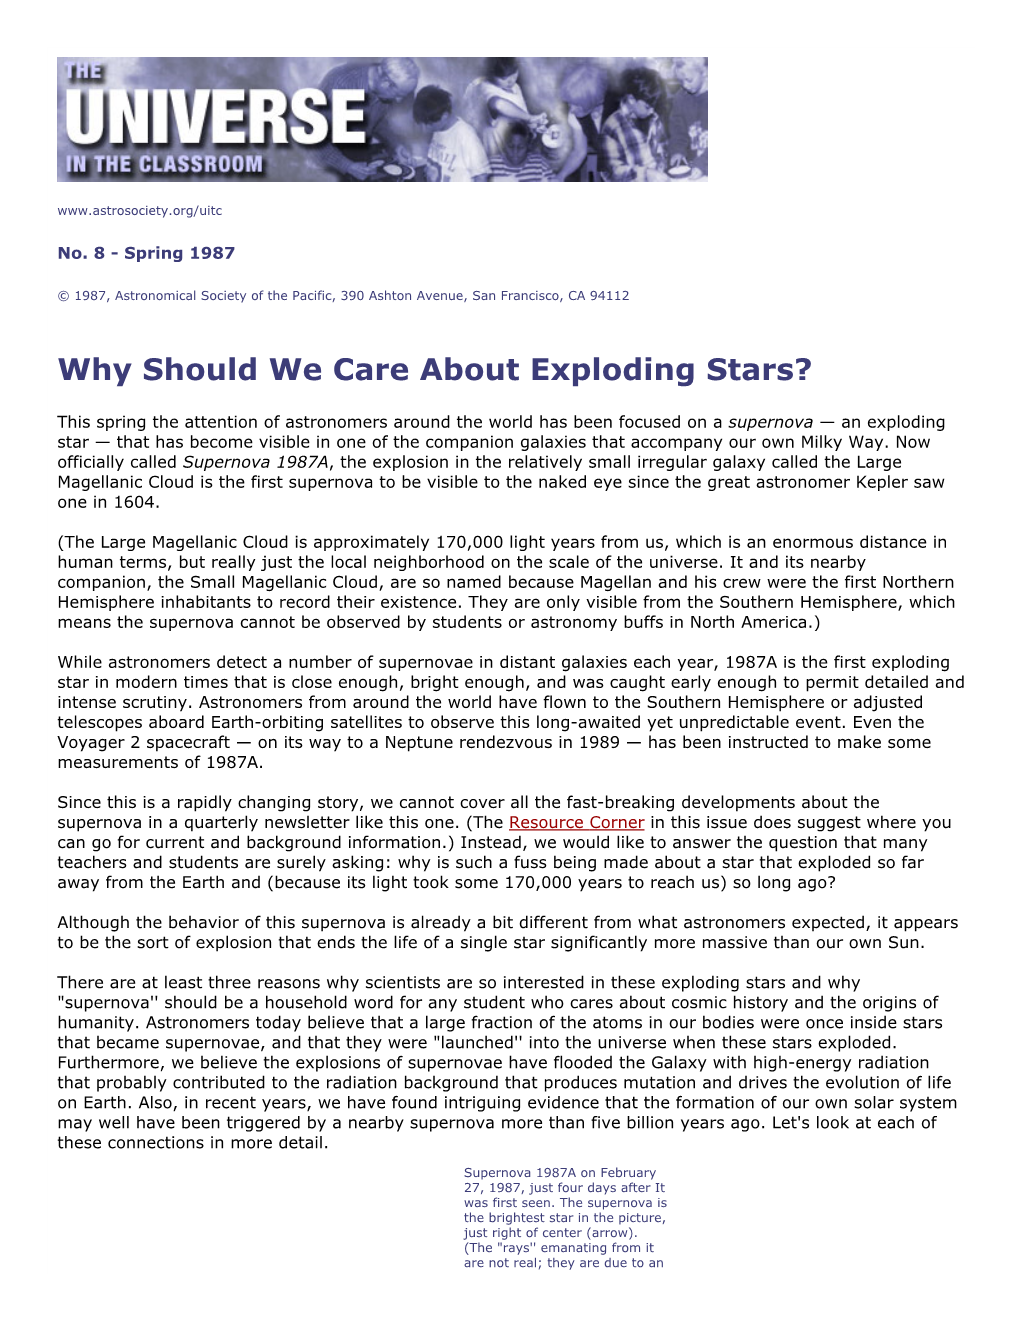 Why Should We Care About Exploding Stars?